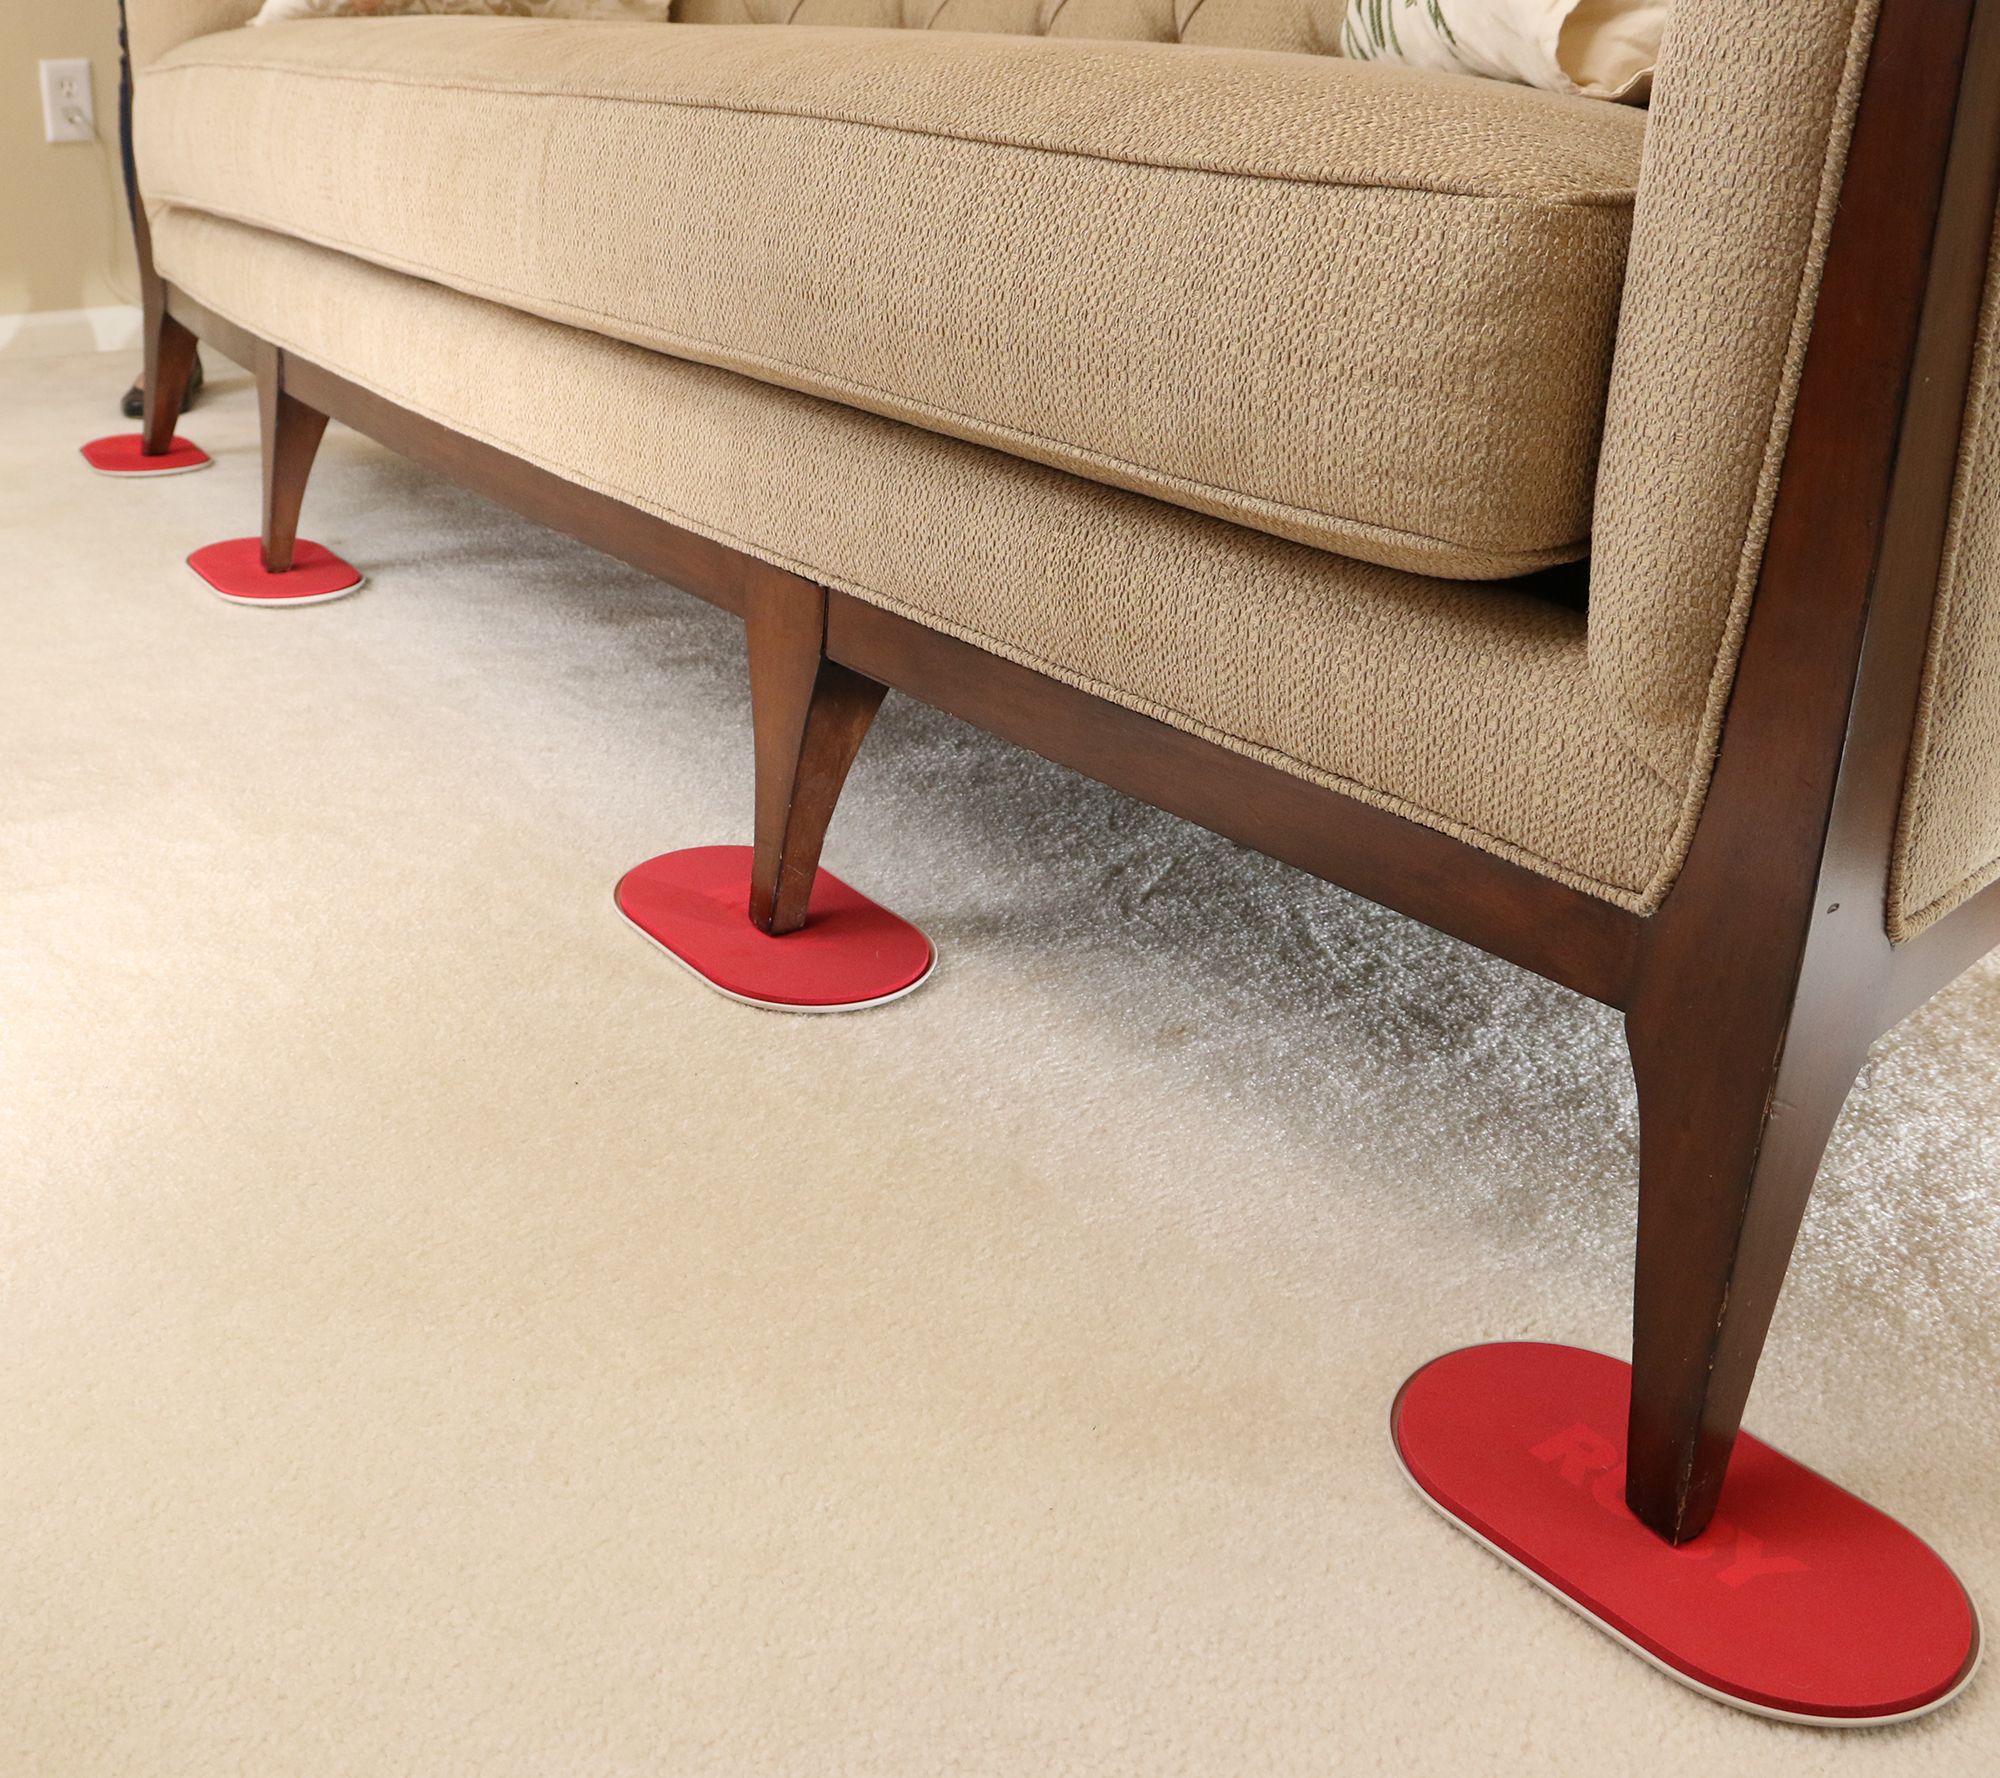 Ruby Movers Furniture Sliders For Carpet, As Seen on TV, Effortlessly Move